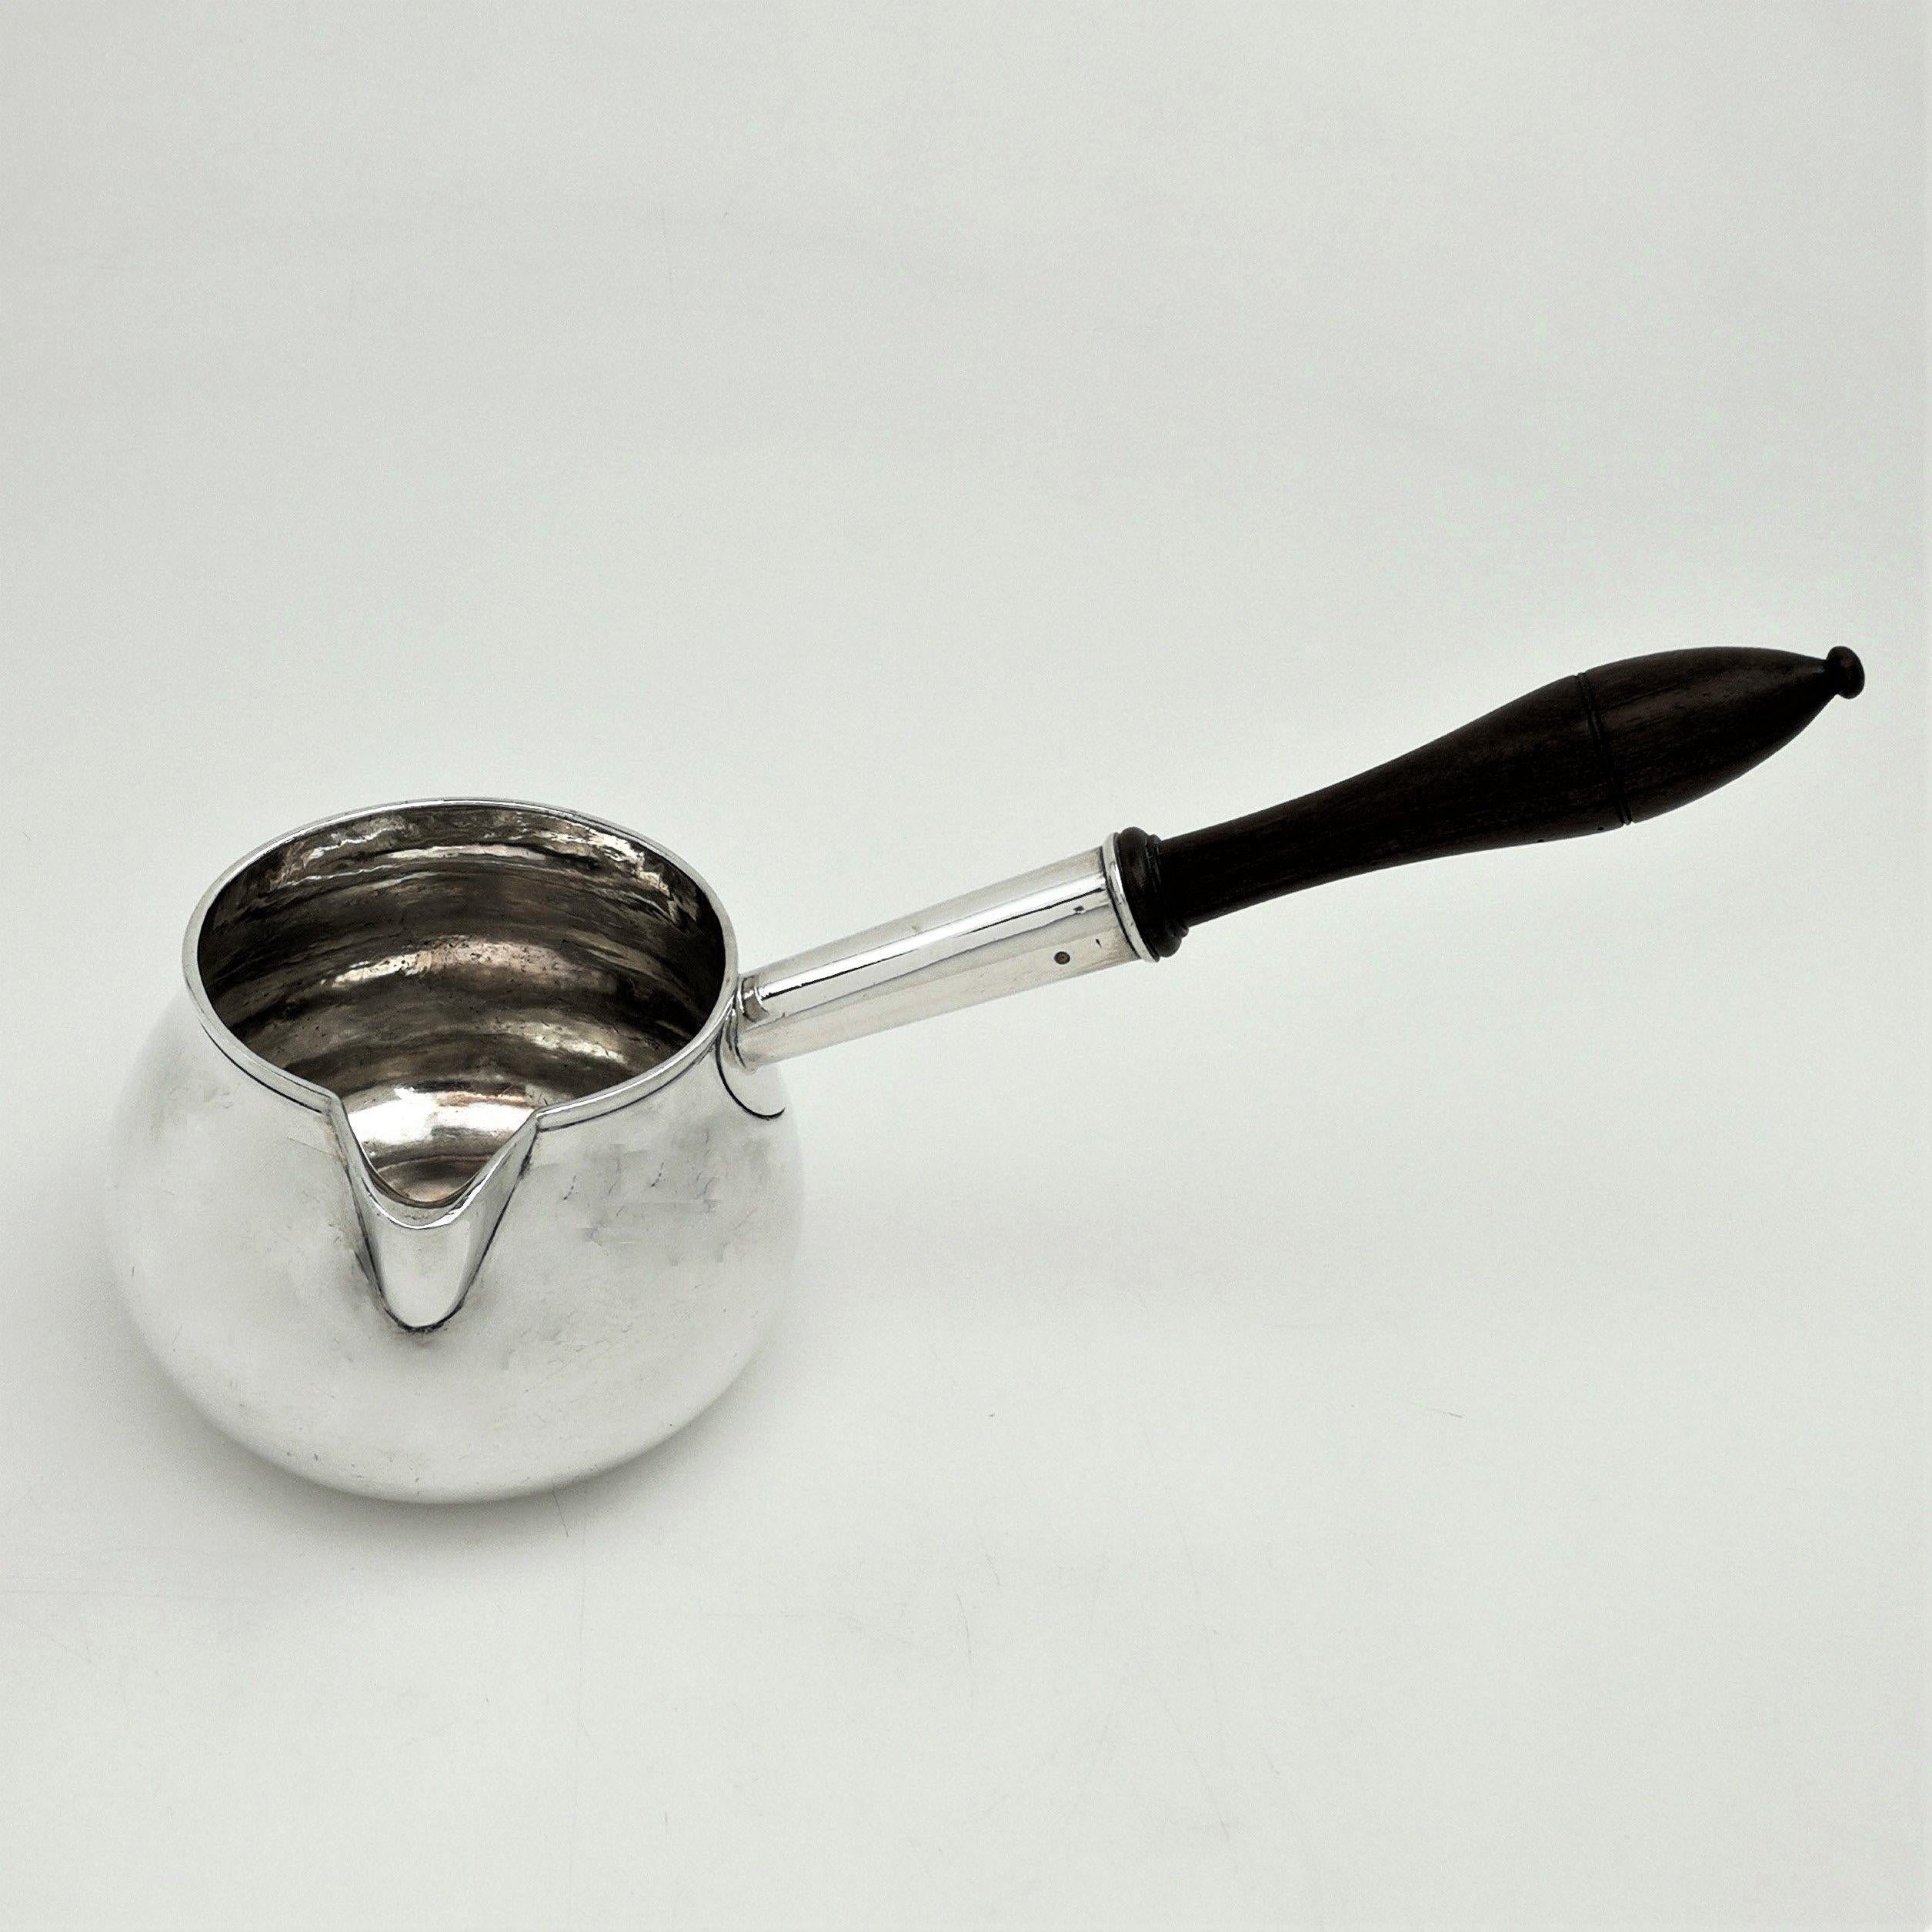 An elegant Antique George I solid silver Brandy Warming Pan with a plain baluster shape and a sturdy wooden handle. This Brandy Warmer is of particularly substantial size.
 
 Made in London in 1725 by William Spackman.
 
 Approx. Weight - 600g
